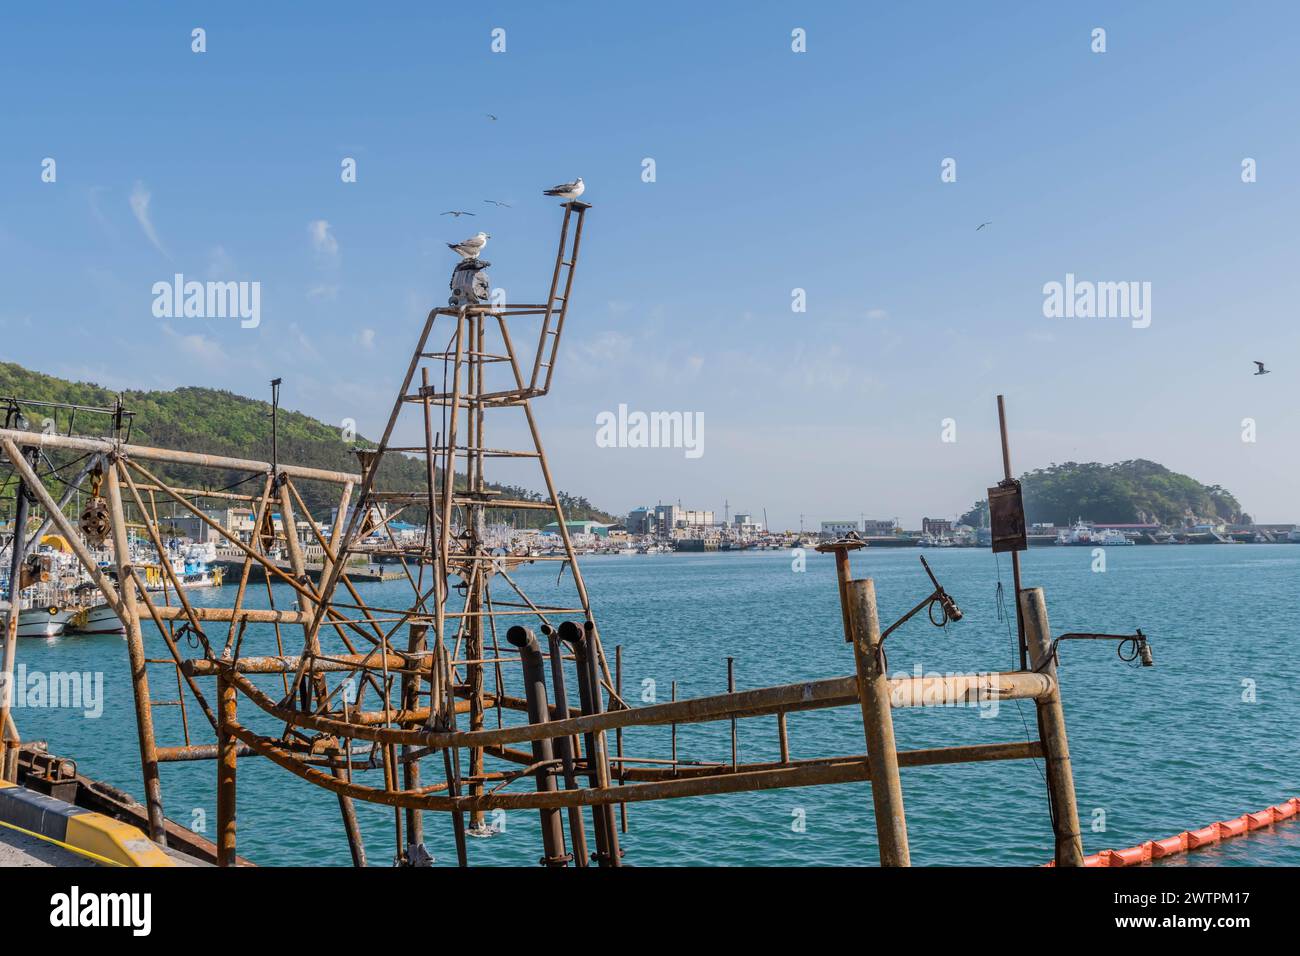 Bird perching on a metal structure at a sea harbor with clear skies, in Sinjin-do, South Korea, Asia Stock Photo